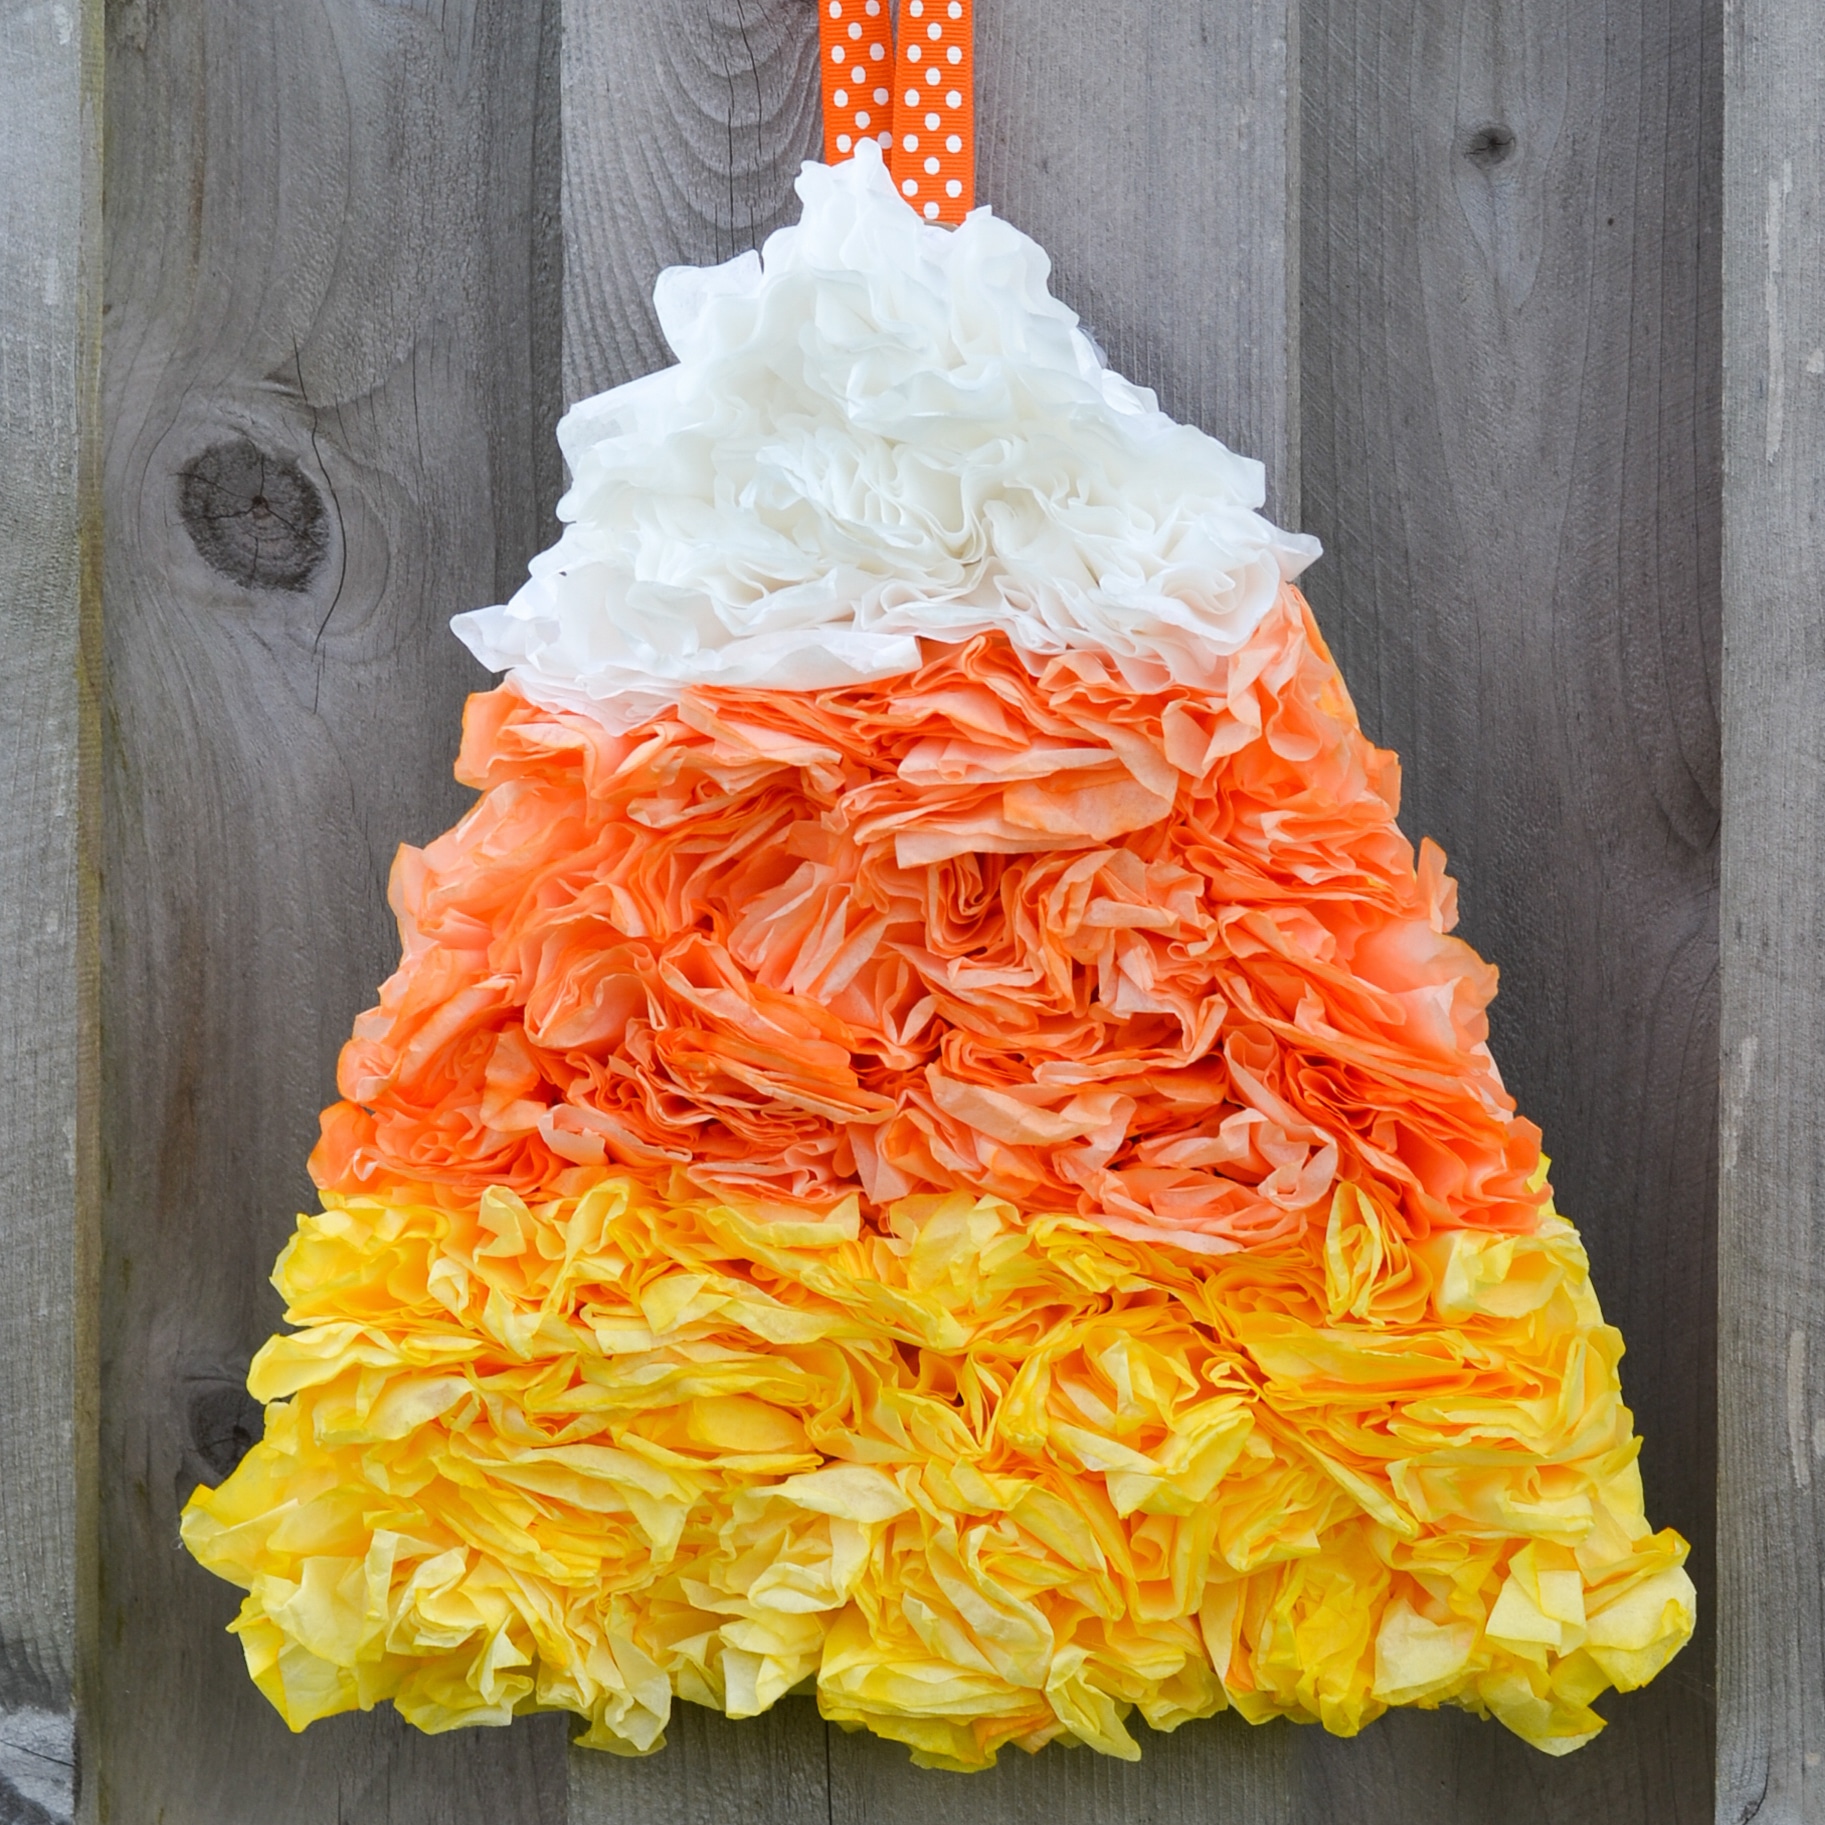 Coffee Filter Candy Corn - Typically Simple